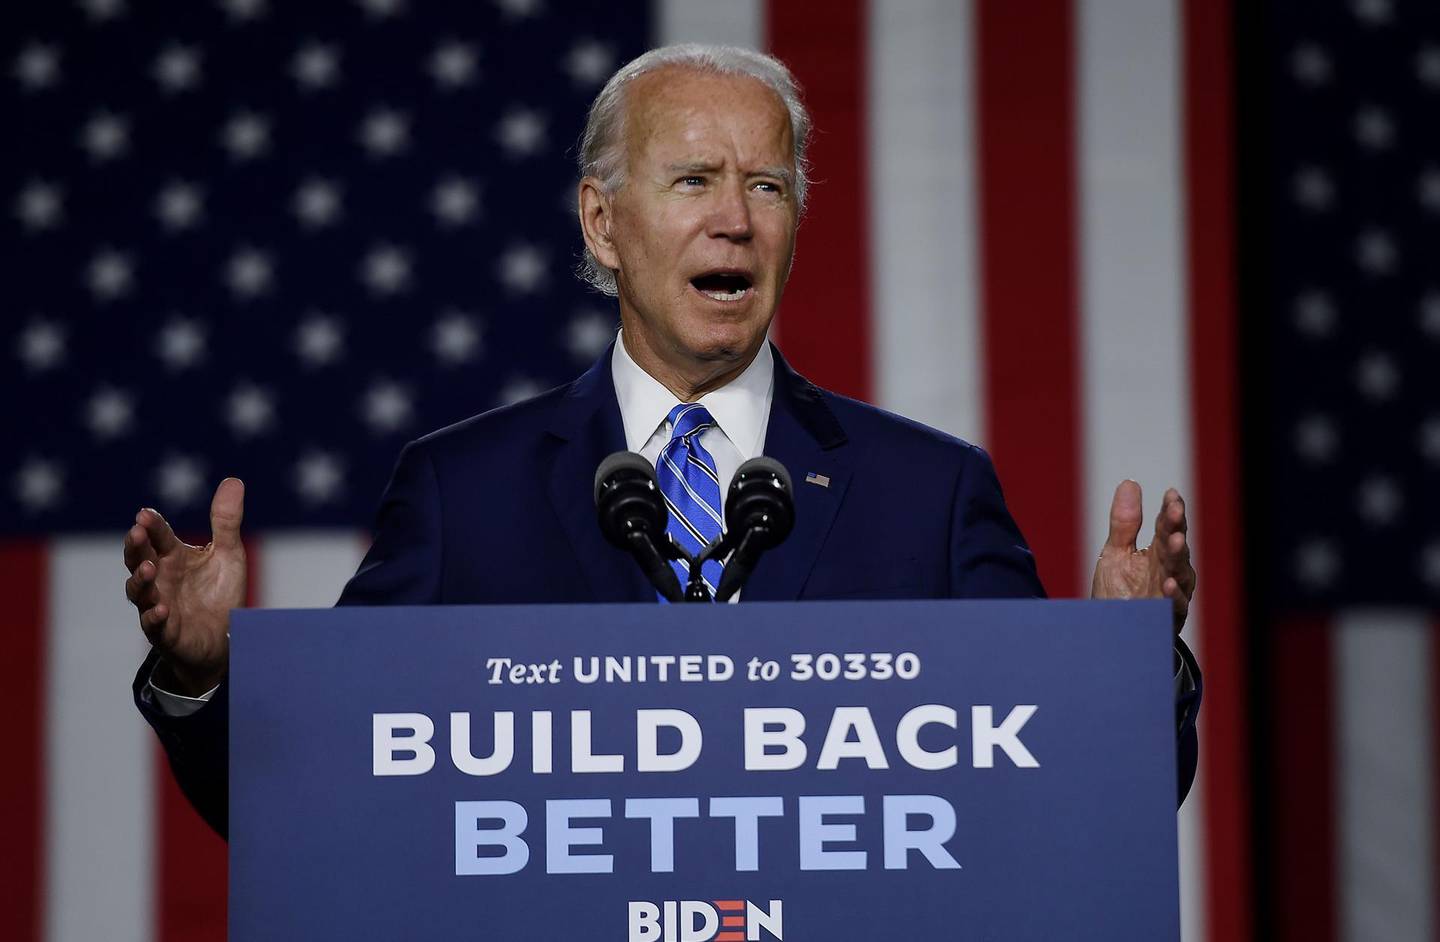 (FILES) In this file photo taken on July 13, 2020 Democratic presidential candidate and former Vice President Joe Biden speaks at a  "Build Back Better" Clean Energy event at the Chase Center in Wilmington, Delaware.  Donald Trump has 100 days from Sunday to save his presidency as America tries to avoid a collective nervous breakdown ahead of one of the most divisive, tension-filled elections in US history. / AFP / Olivier DOULIERY
